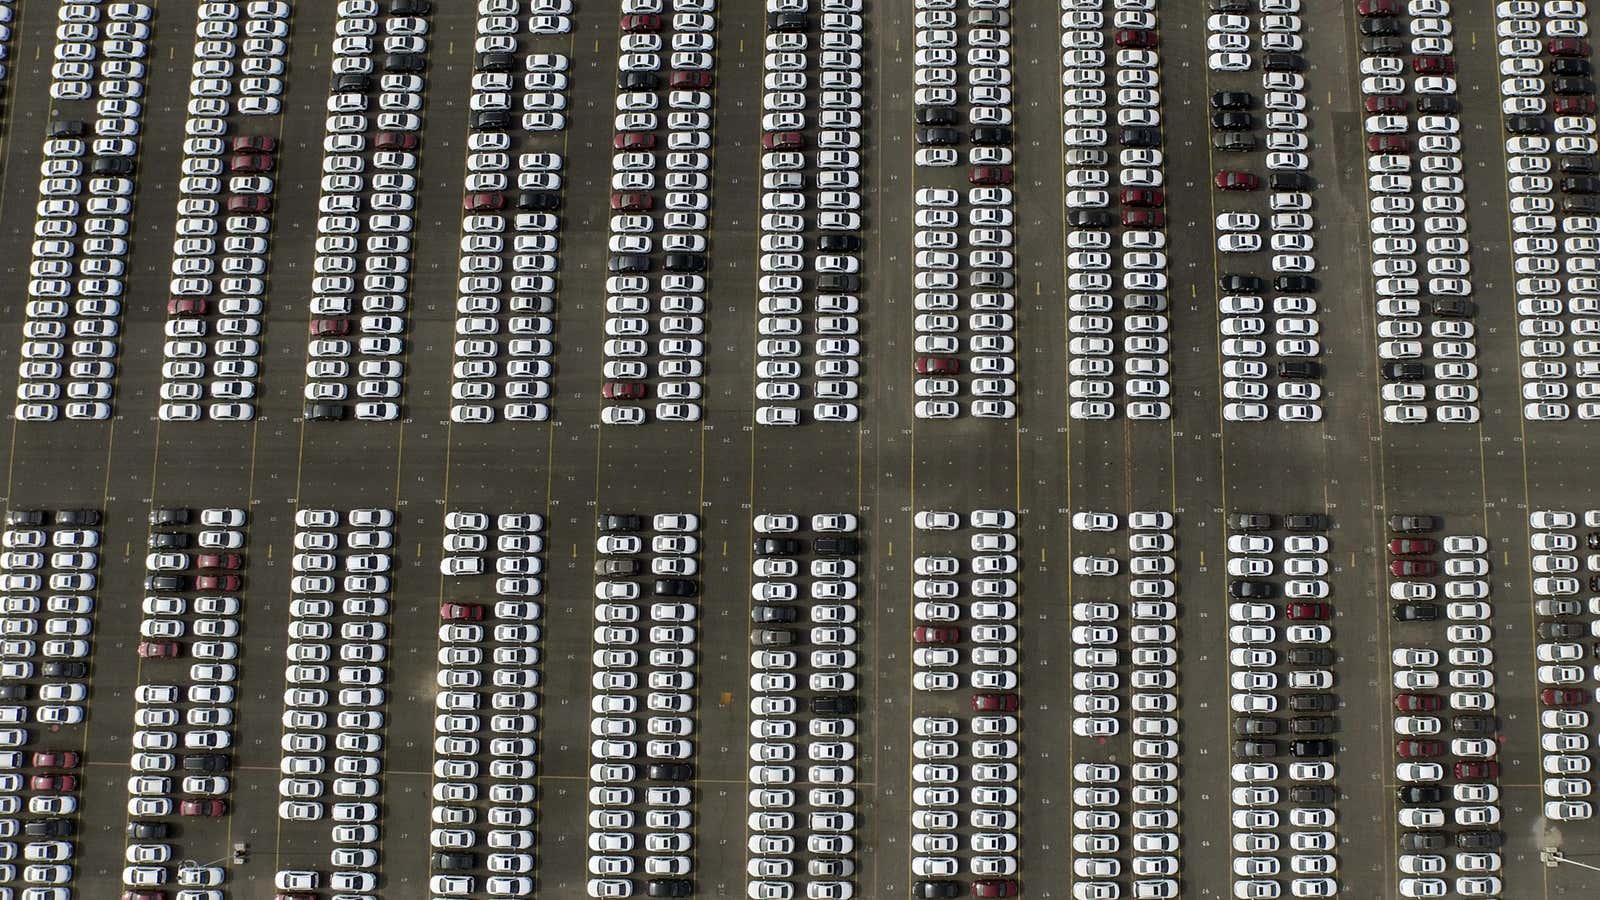 New Chevrolets parked in the General Motors lot in Shenyang, China.